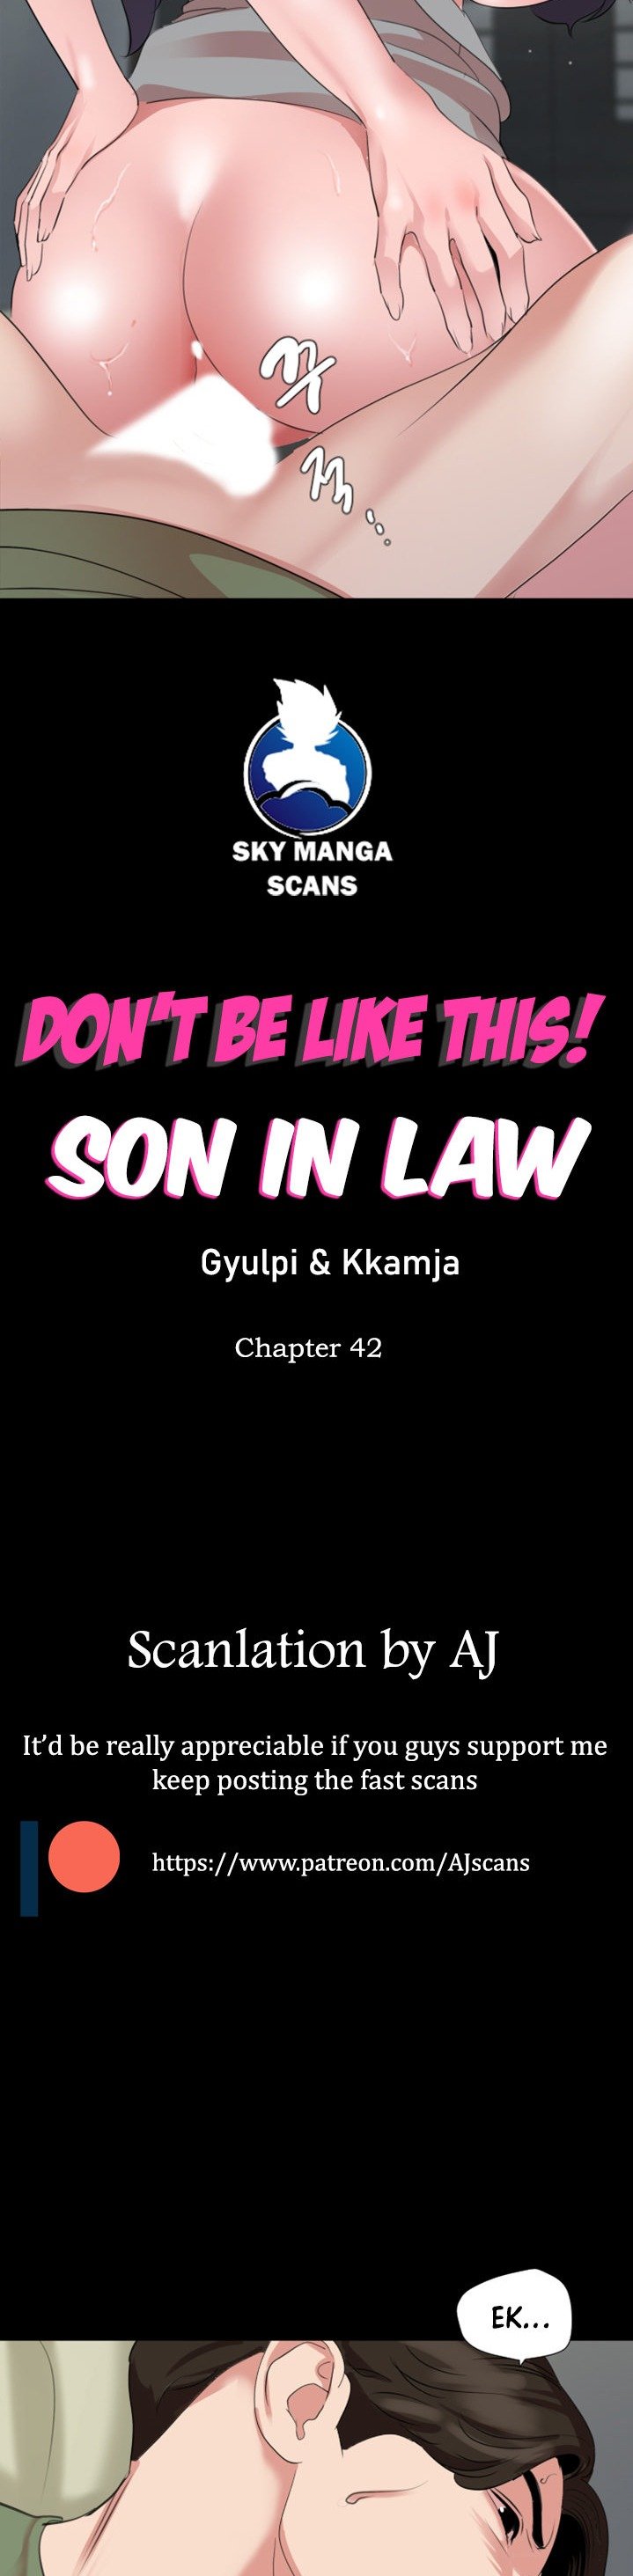 dont-be-like-this-son-in-law-chap-42-1